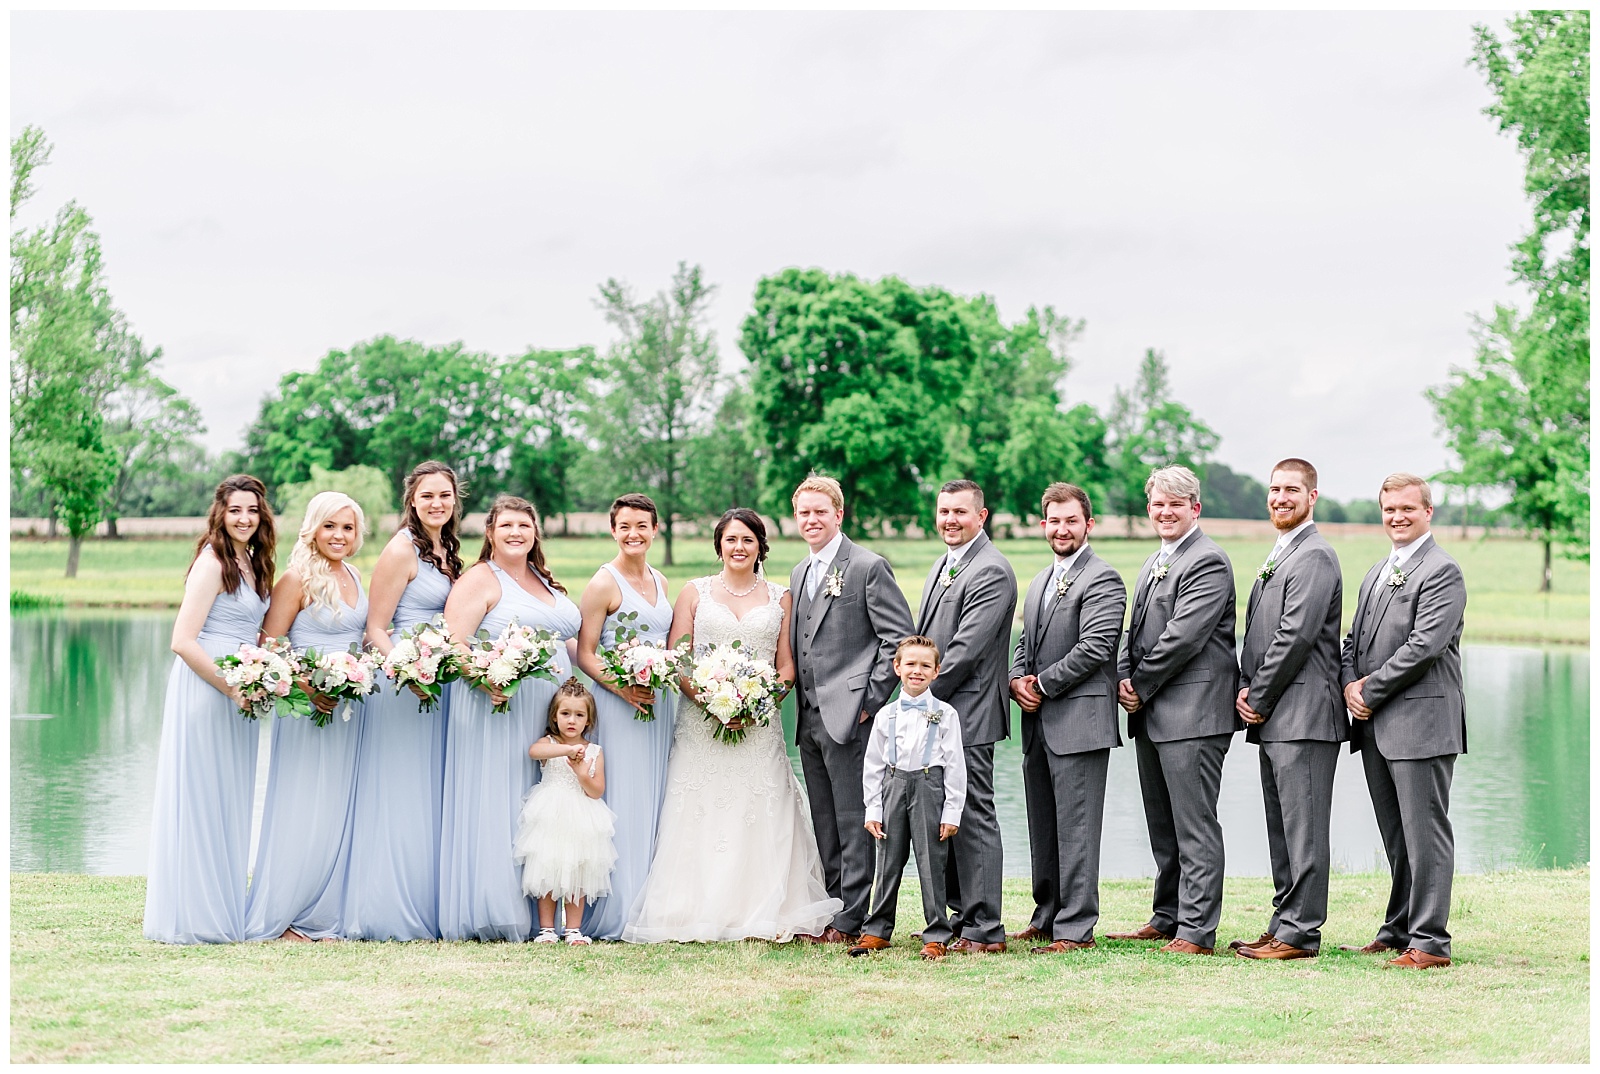 Bridal party shot at rustic farm venue with blue and grey details